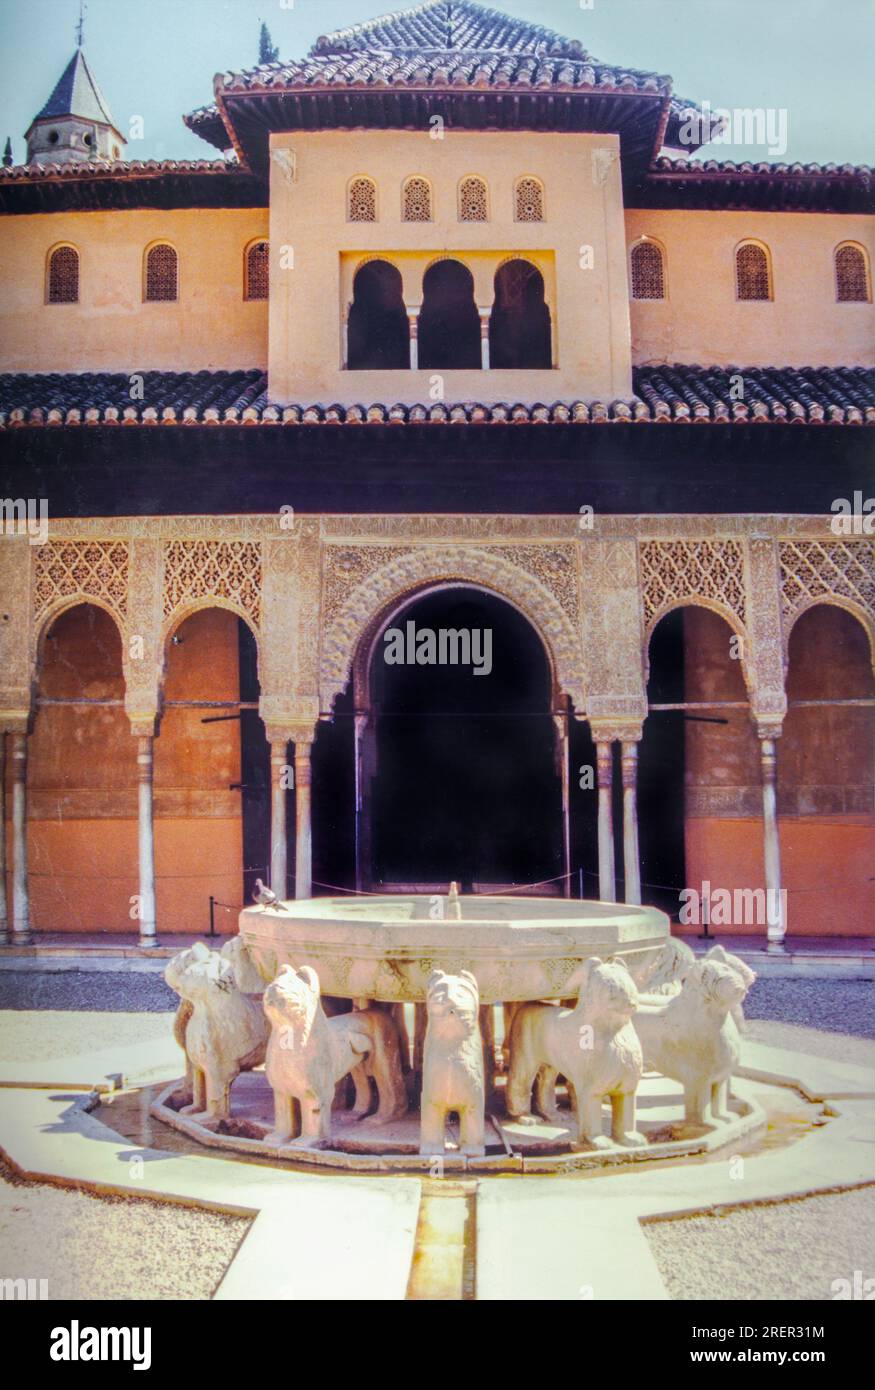 Granada, Spain - March 28th, 2004: Alhambra Lions fountain. Digitized film photography Stock Photo